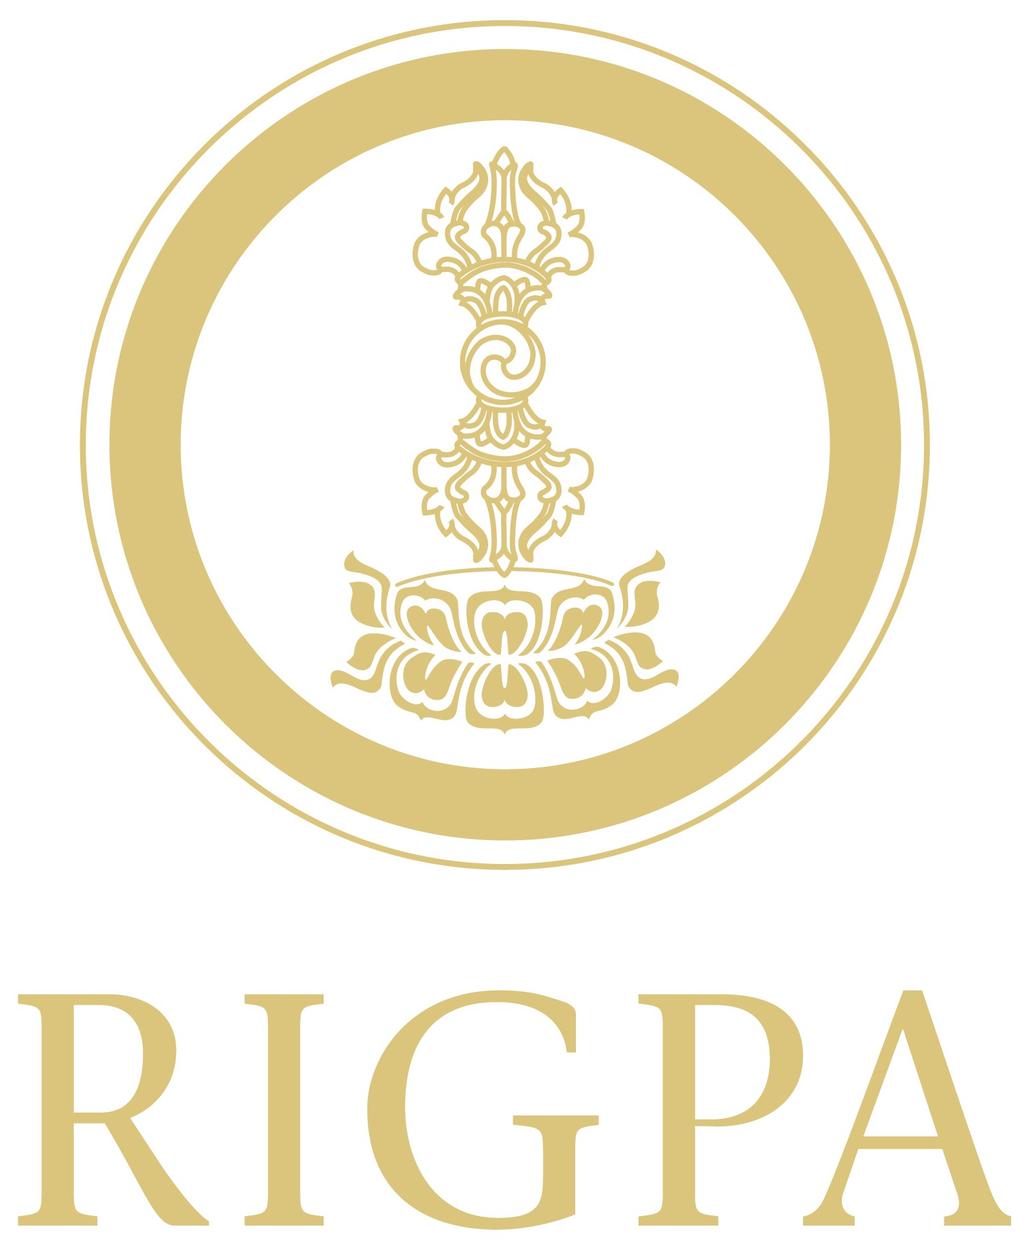 Shared Values and Guidelines of the Rigpa Community The Rigpa community is committed to the highest standards of care and ethical conduct, and expects its members to abide by the Rigpa Code of